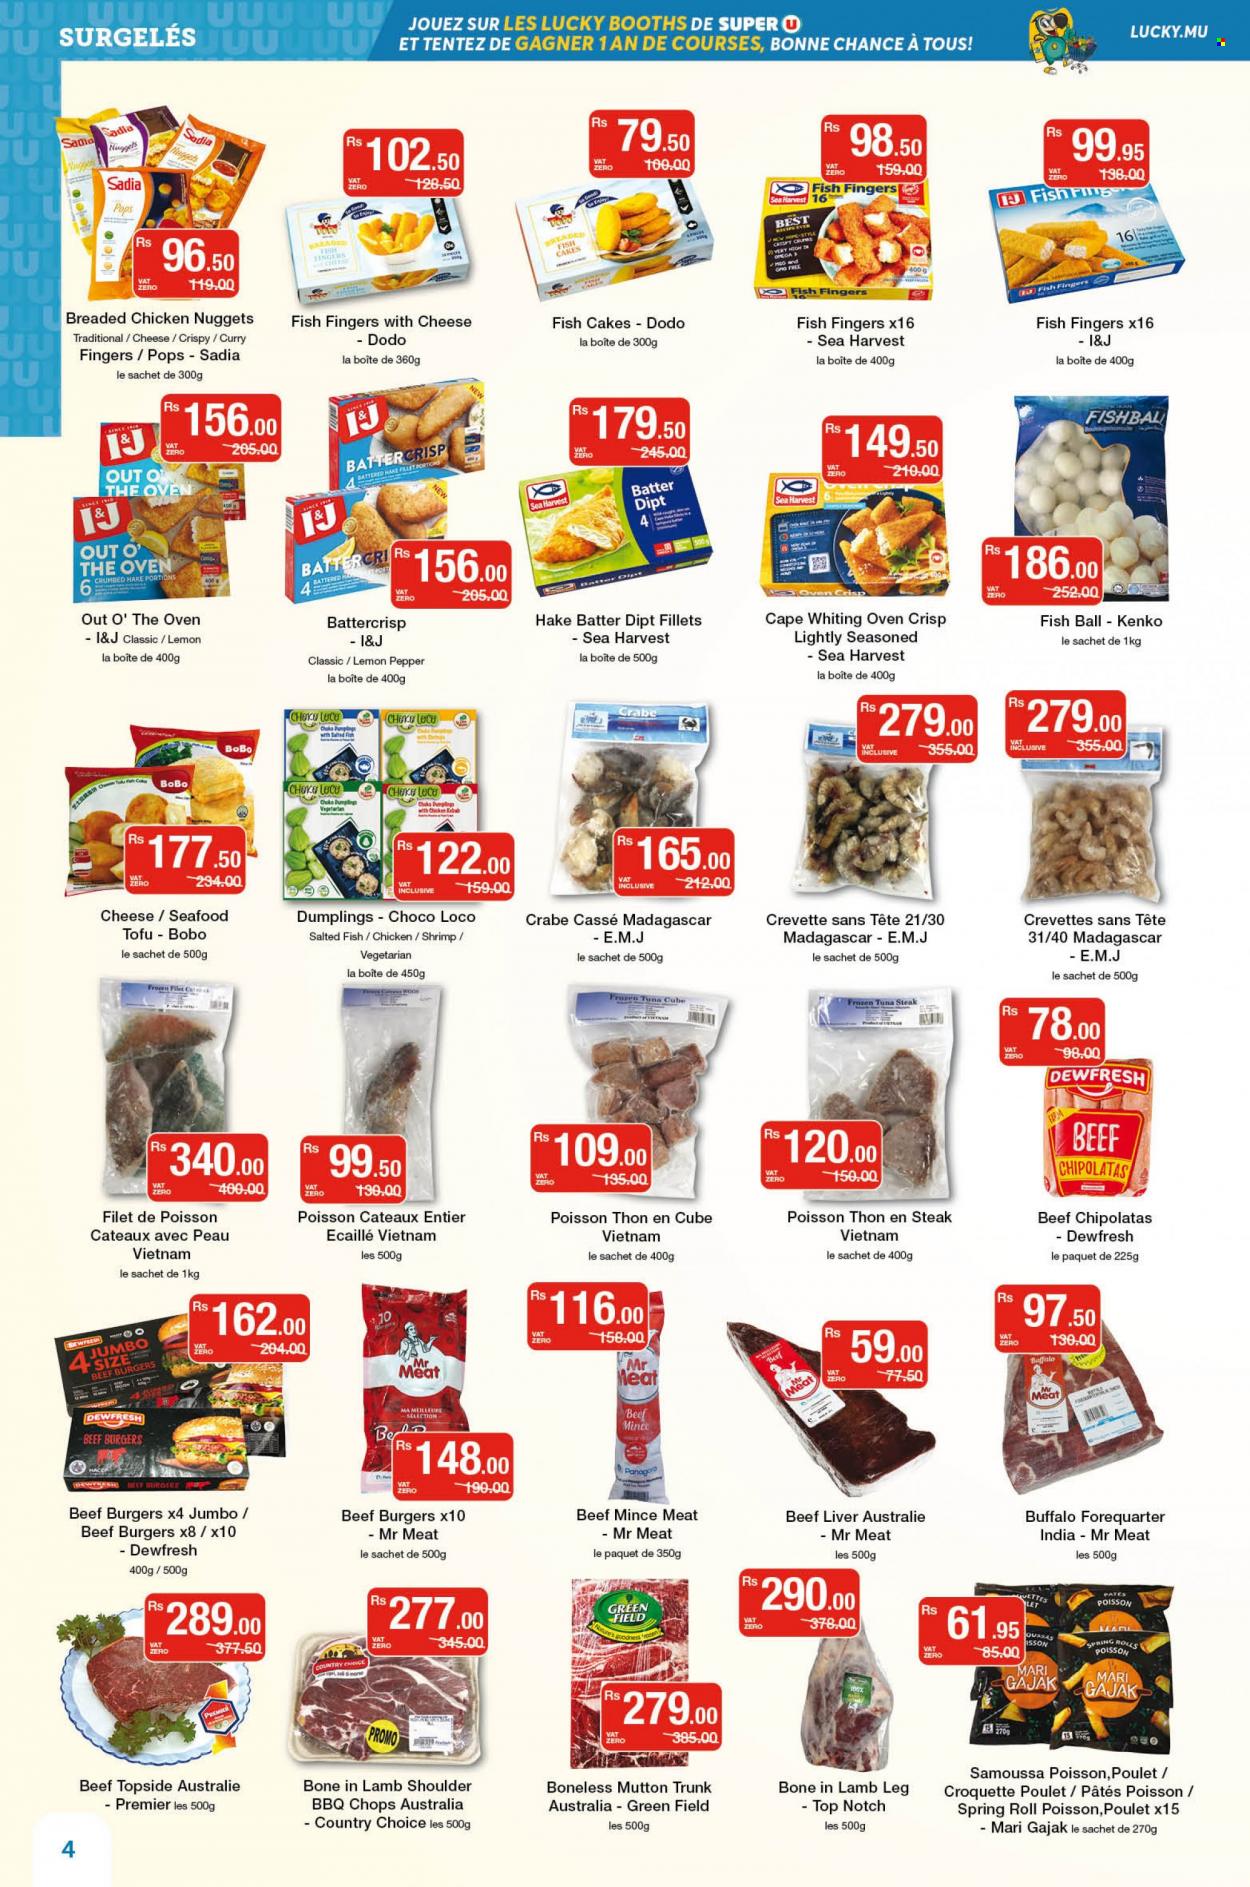 thumbnail - Super U Catalogue - 8.10.2022 - 24.10.2022 - Sales products - chayote, tuna, seafood, hake, shrimps, fish fingers, whiting, Sea Harvest, fish sticks, nuggets, hamburger, fried chicken, chicken nuggets, dumplings, spring rolls, chicken kabobs, beef burger, breaded fish, Out o' the Oven, cheese, tofu, fish cake, tuna steak, beef liver, beef meat, ground beef, lamb meat, lamb shoulder, mutton meat, lamb leg, steak. Page 4.